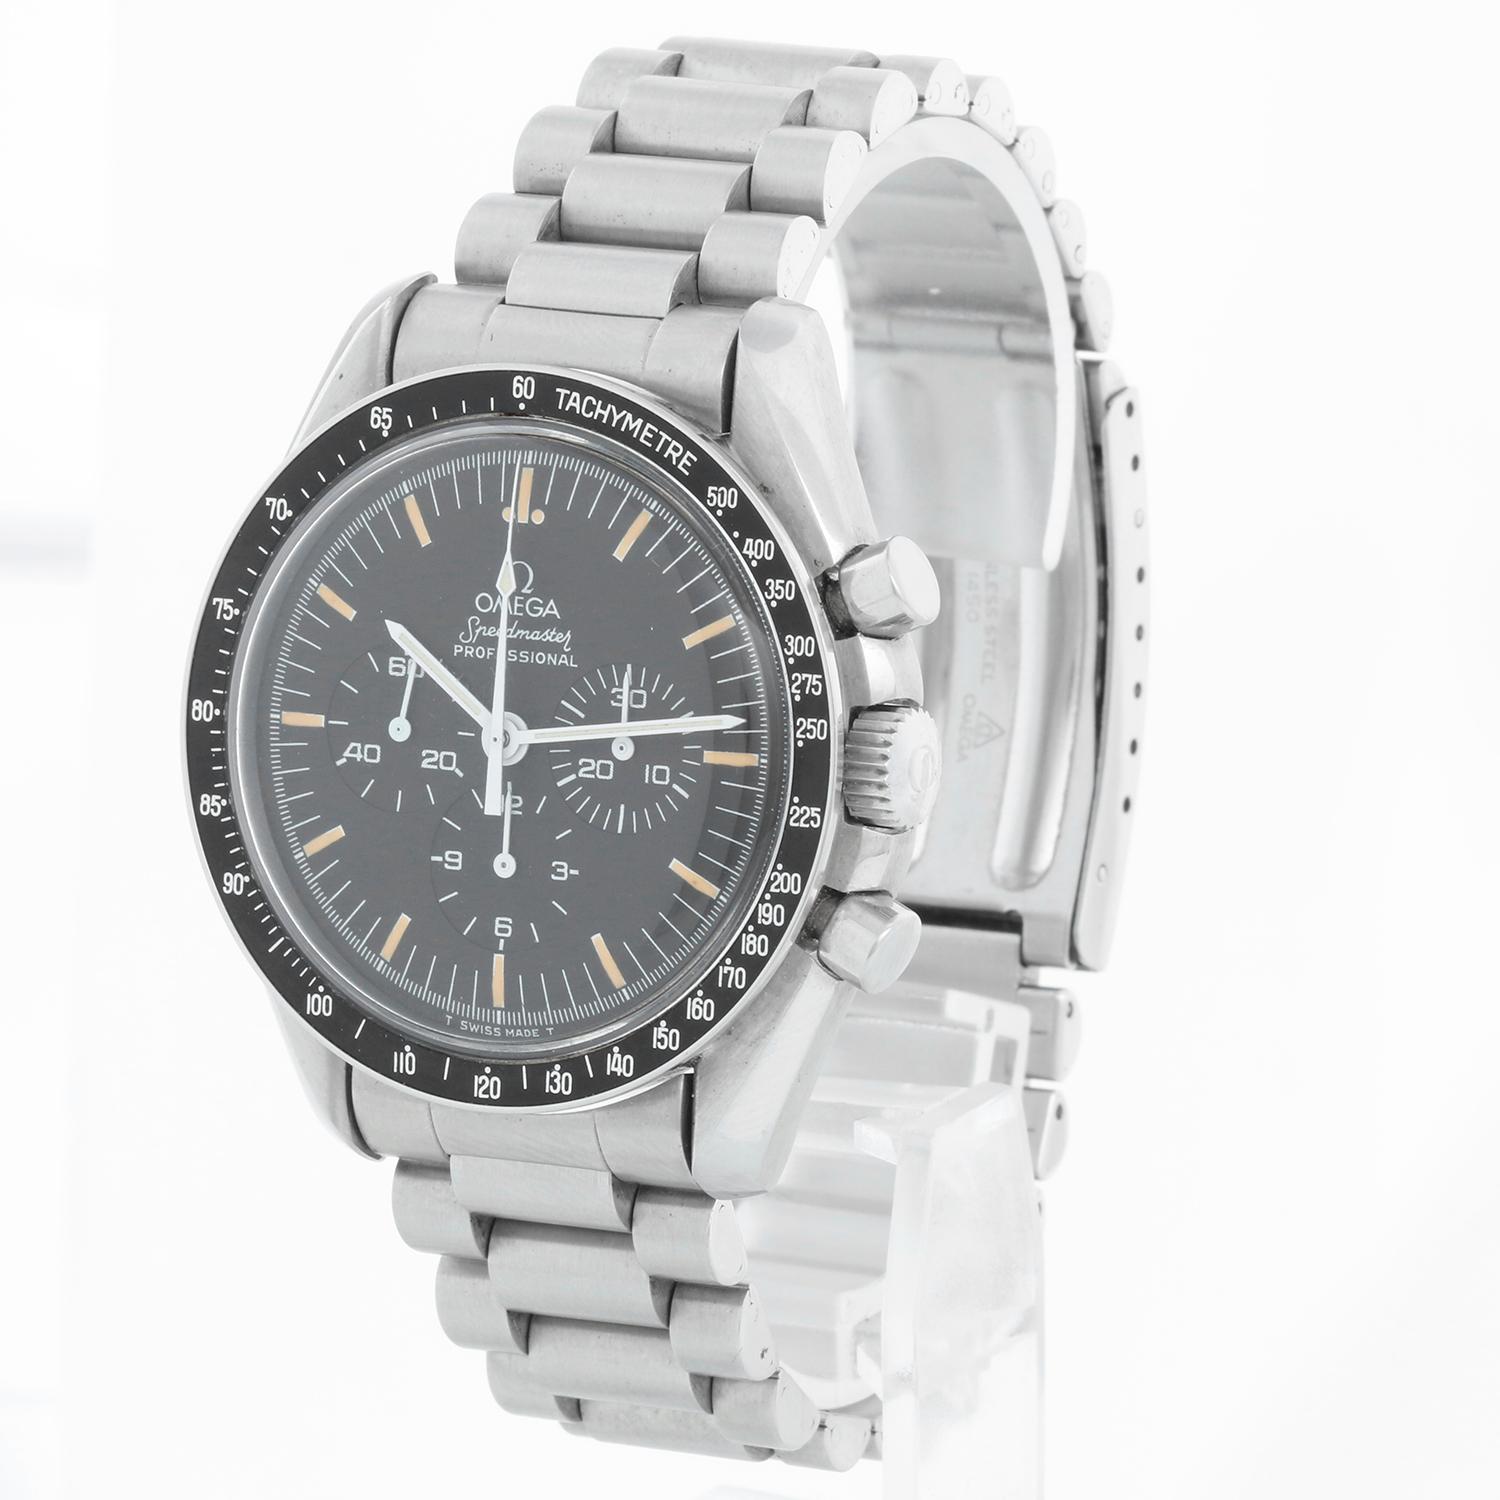 Omega Speedmaster Professional Moonwatch Stainless Steel Manual Wind Men's Watch - Manual winding; 17 jewel, caliber 861. Stainless steel case with black bezel insert  (42mm diameter). Black dial with luminous-style stick markers, three subdials.